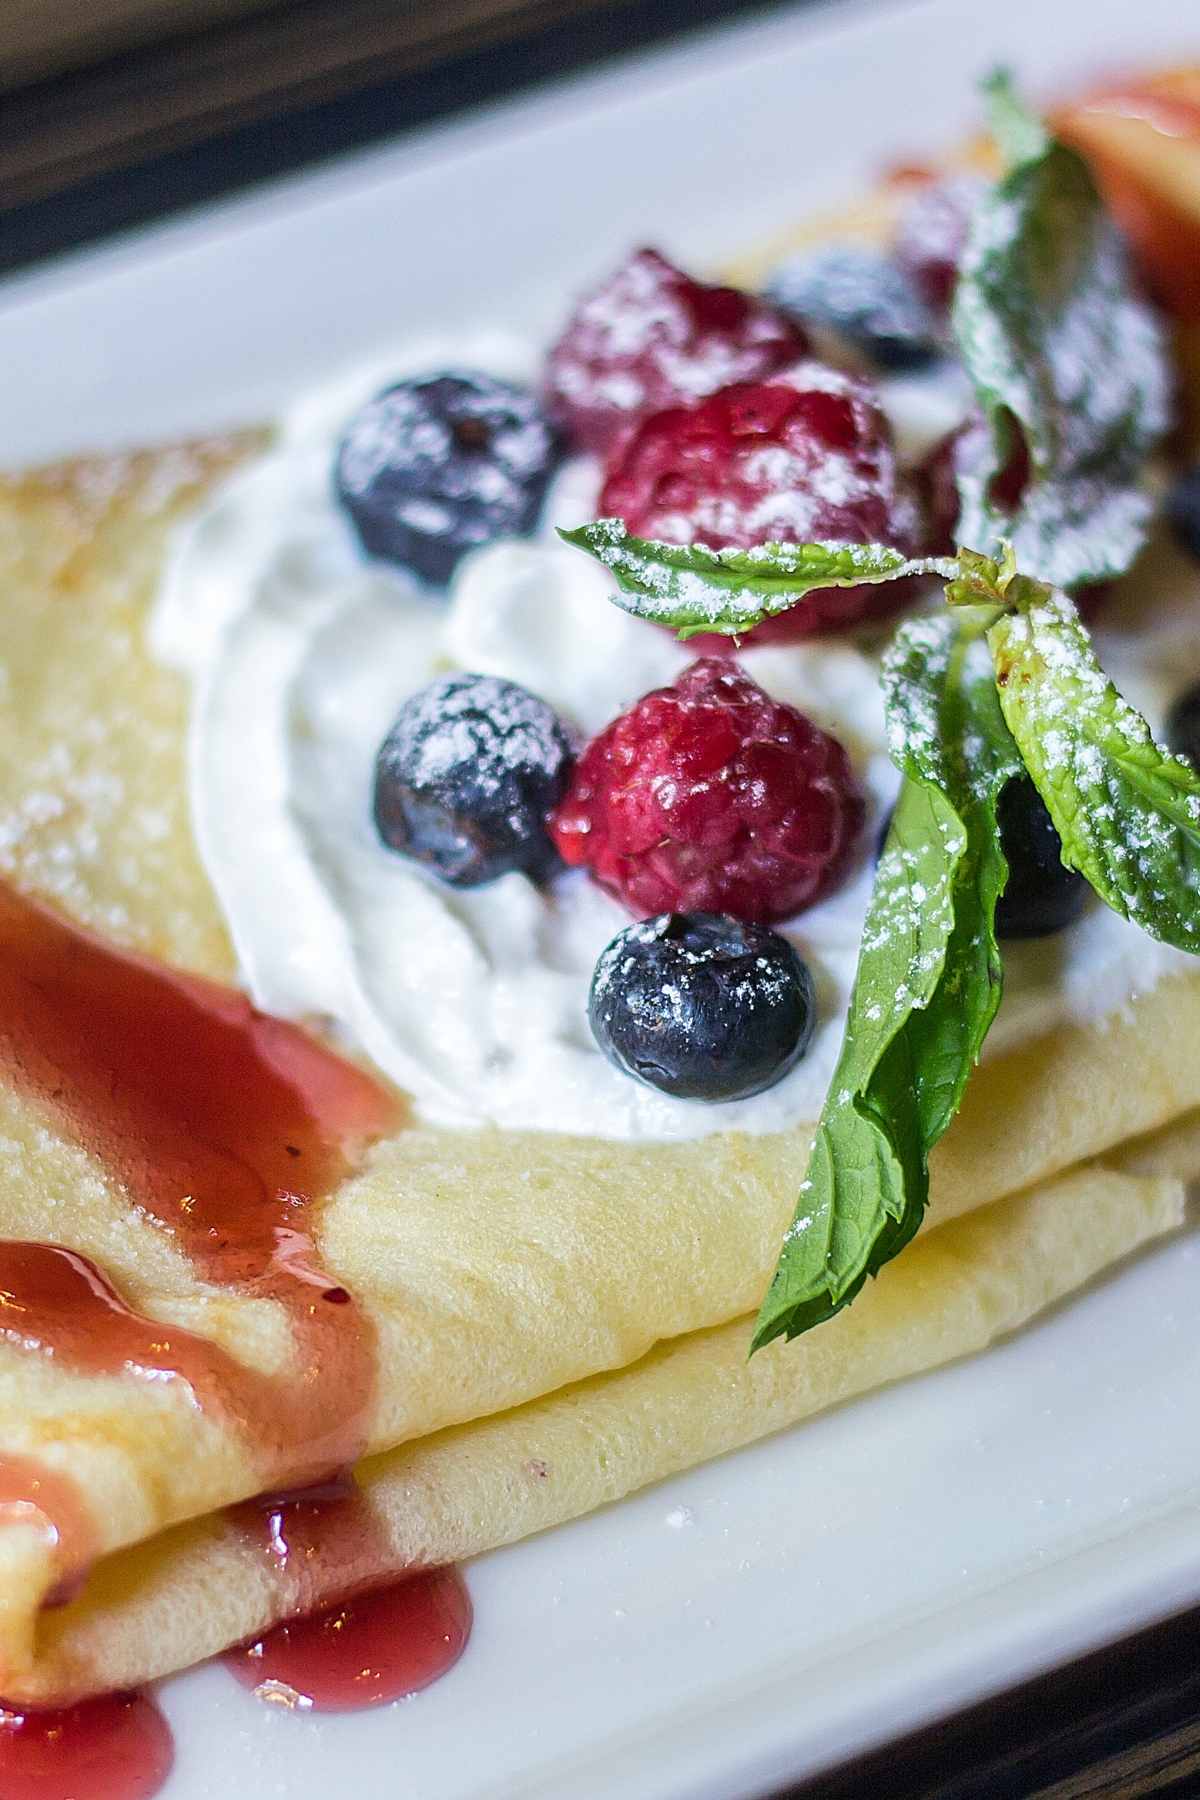 The Cream Cheese Crepe Filling is smooth and sweet, and pairs well with fruit, honey, and chocolate. If your family loves crepes, surprise them with crepes stuffed with this sweet homemade filling.